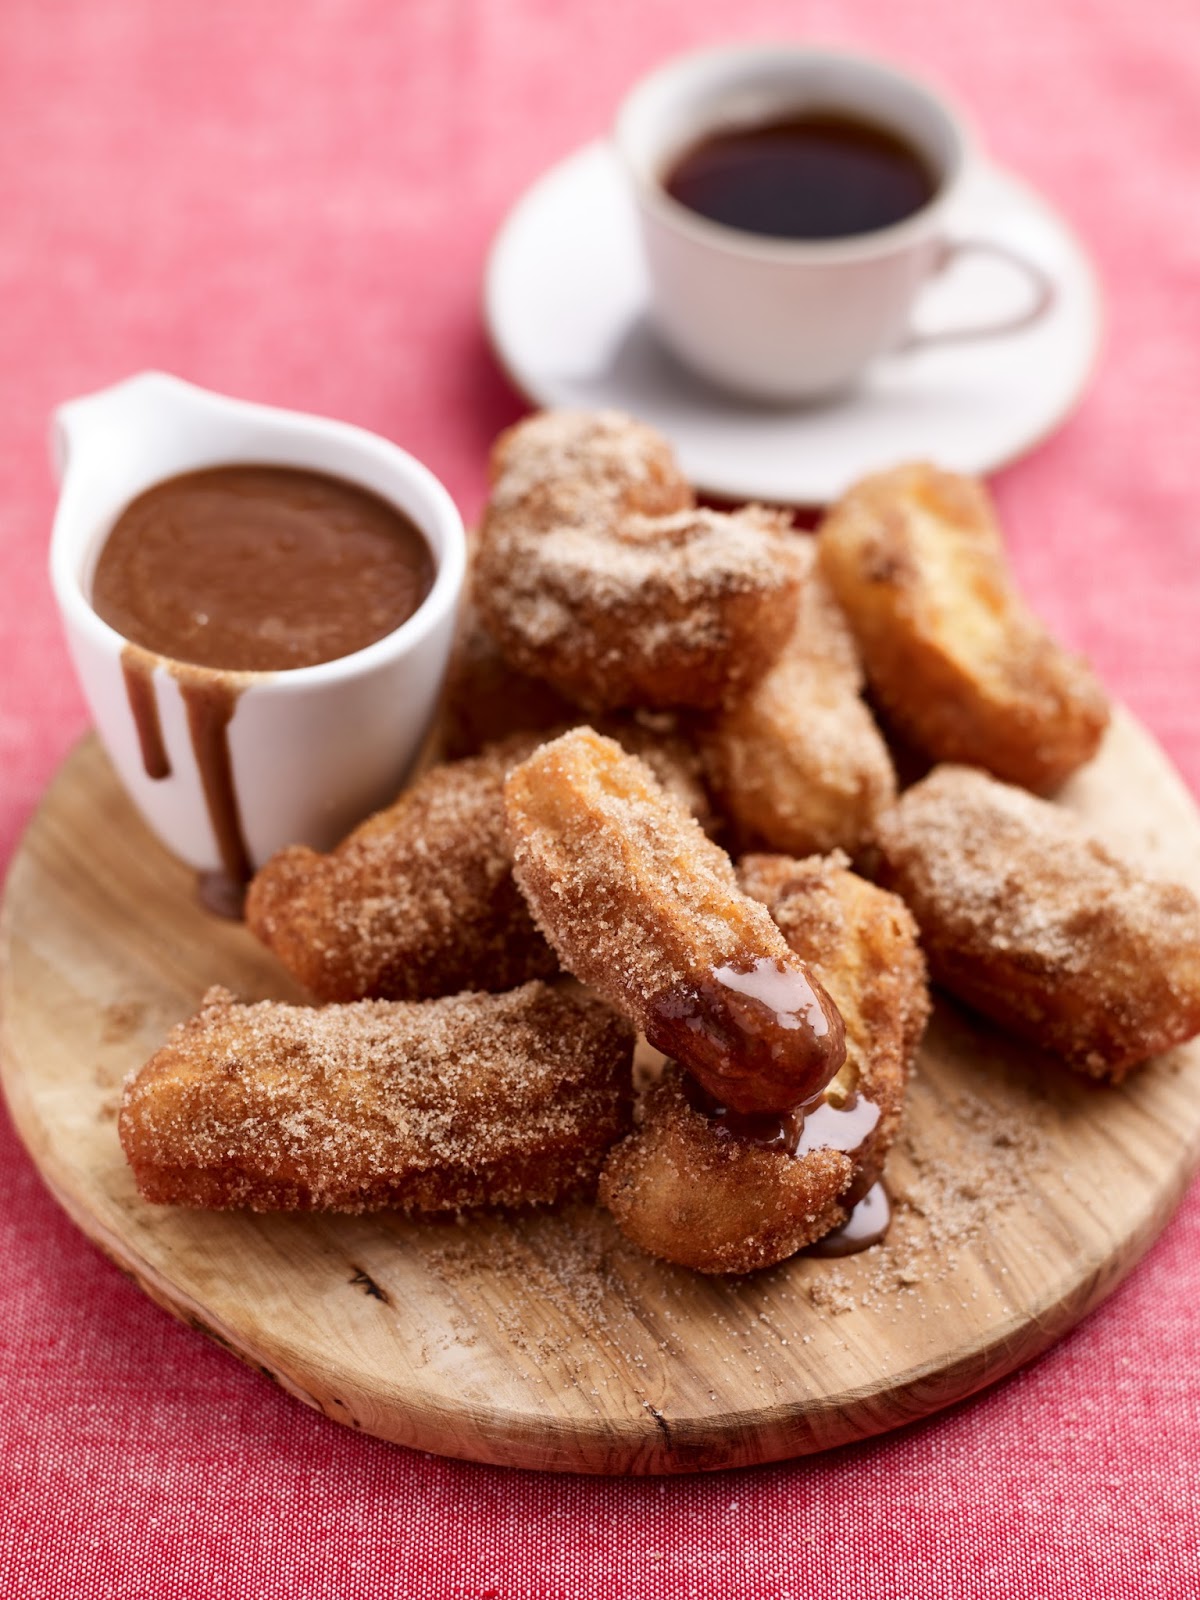 Chocolate Peanut Butter Sauce With Churros